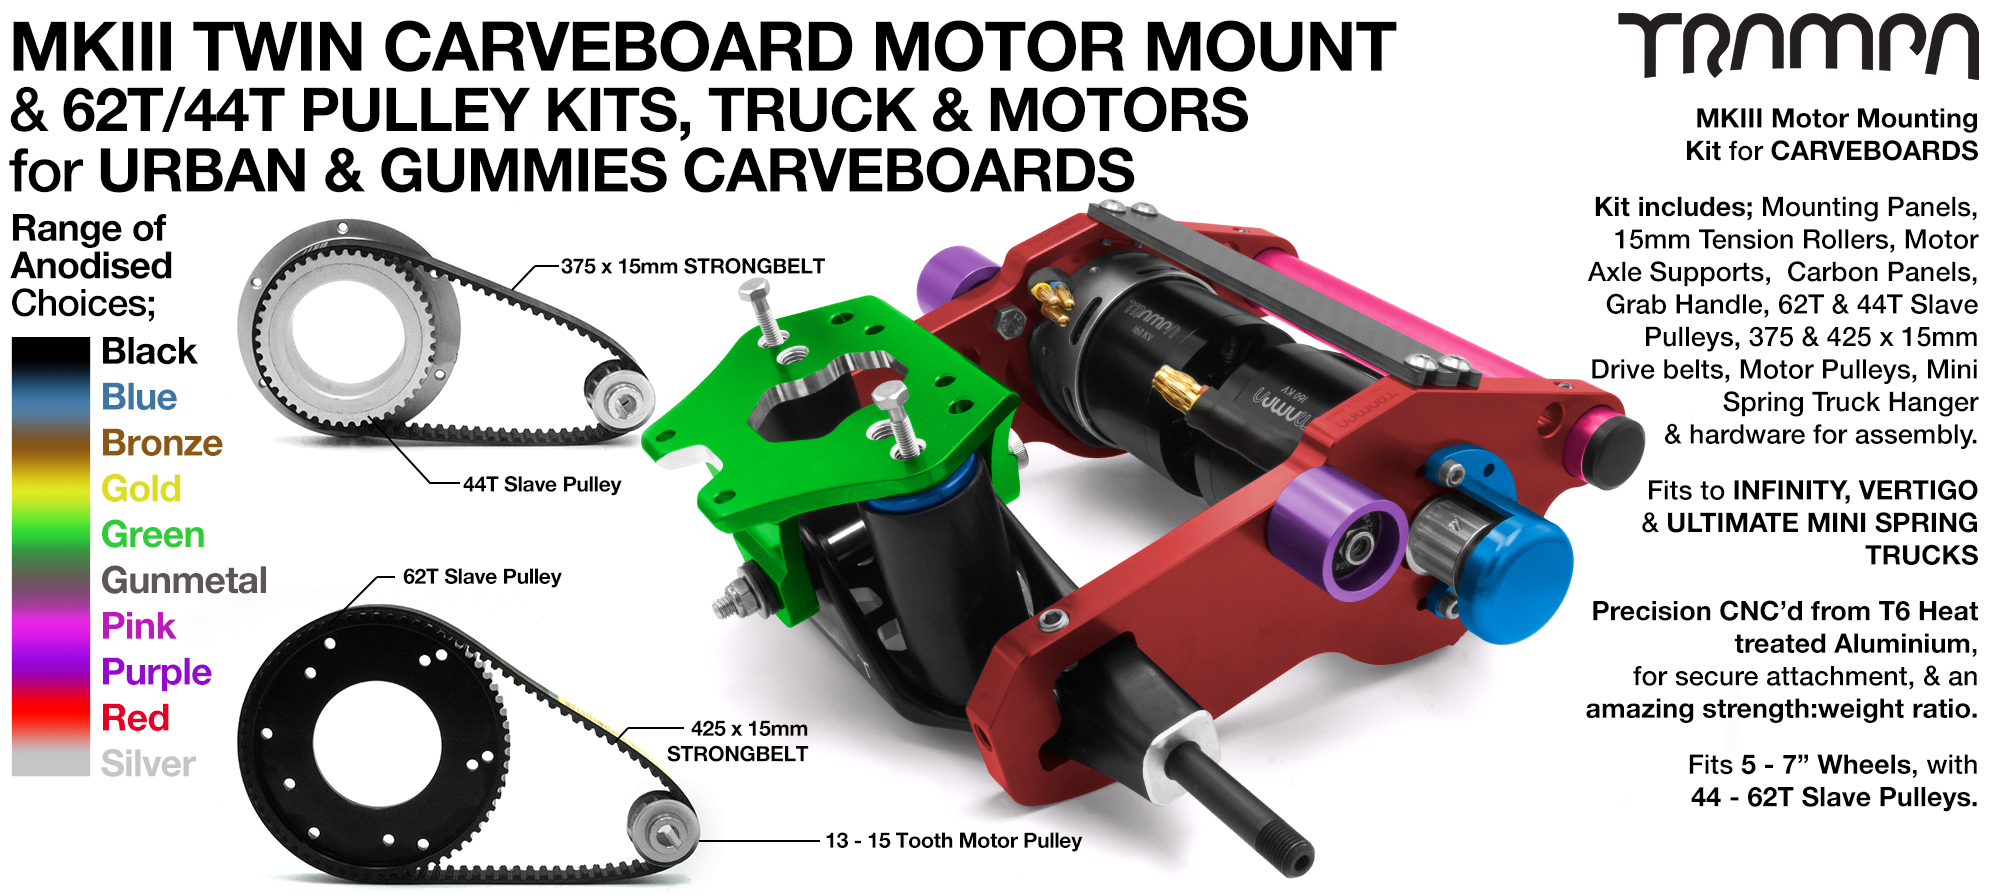 MkIII 2in1 CARVEBOARD Motormount On a TRUCK with 44 tooth GUMMY & 62 tooth URBAN Pulley kits & TRAMPA Motor - TWIN